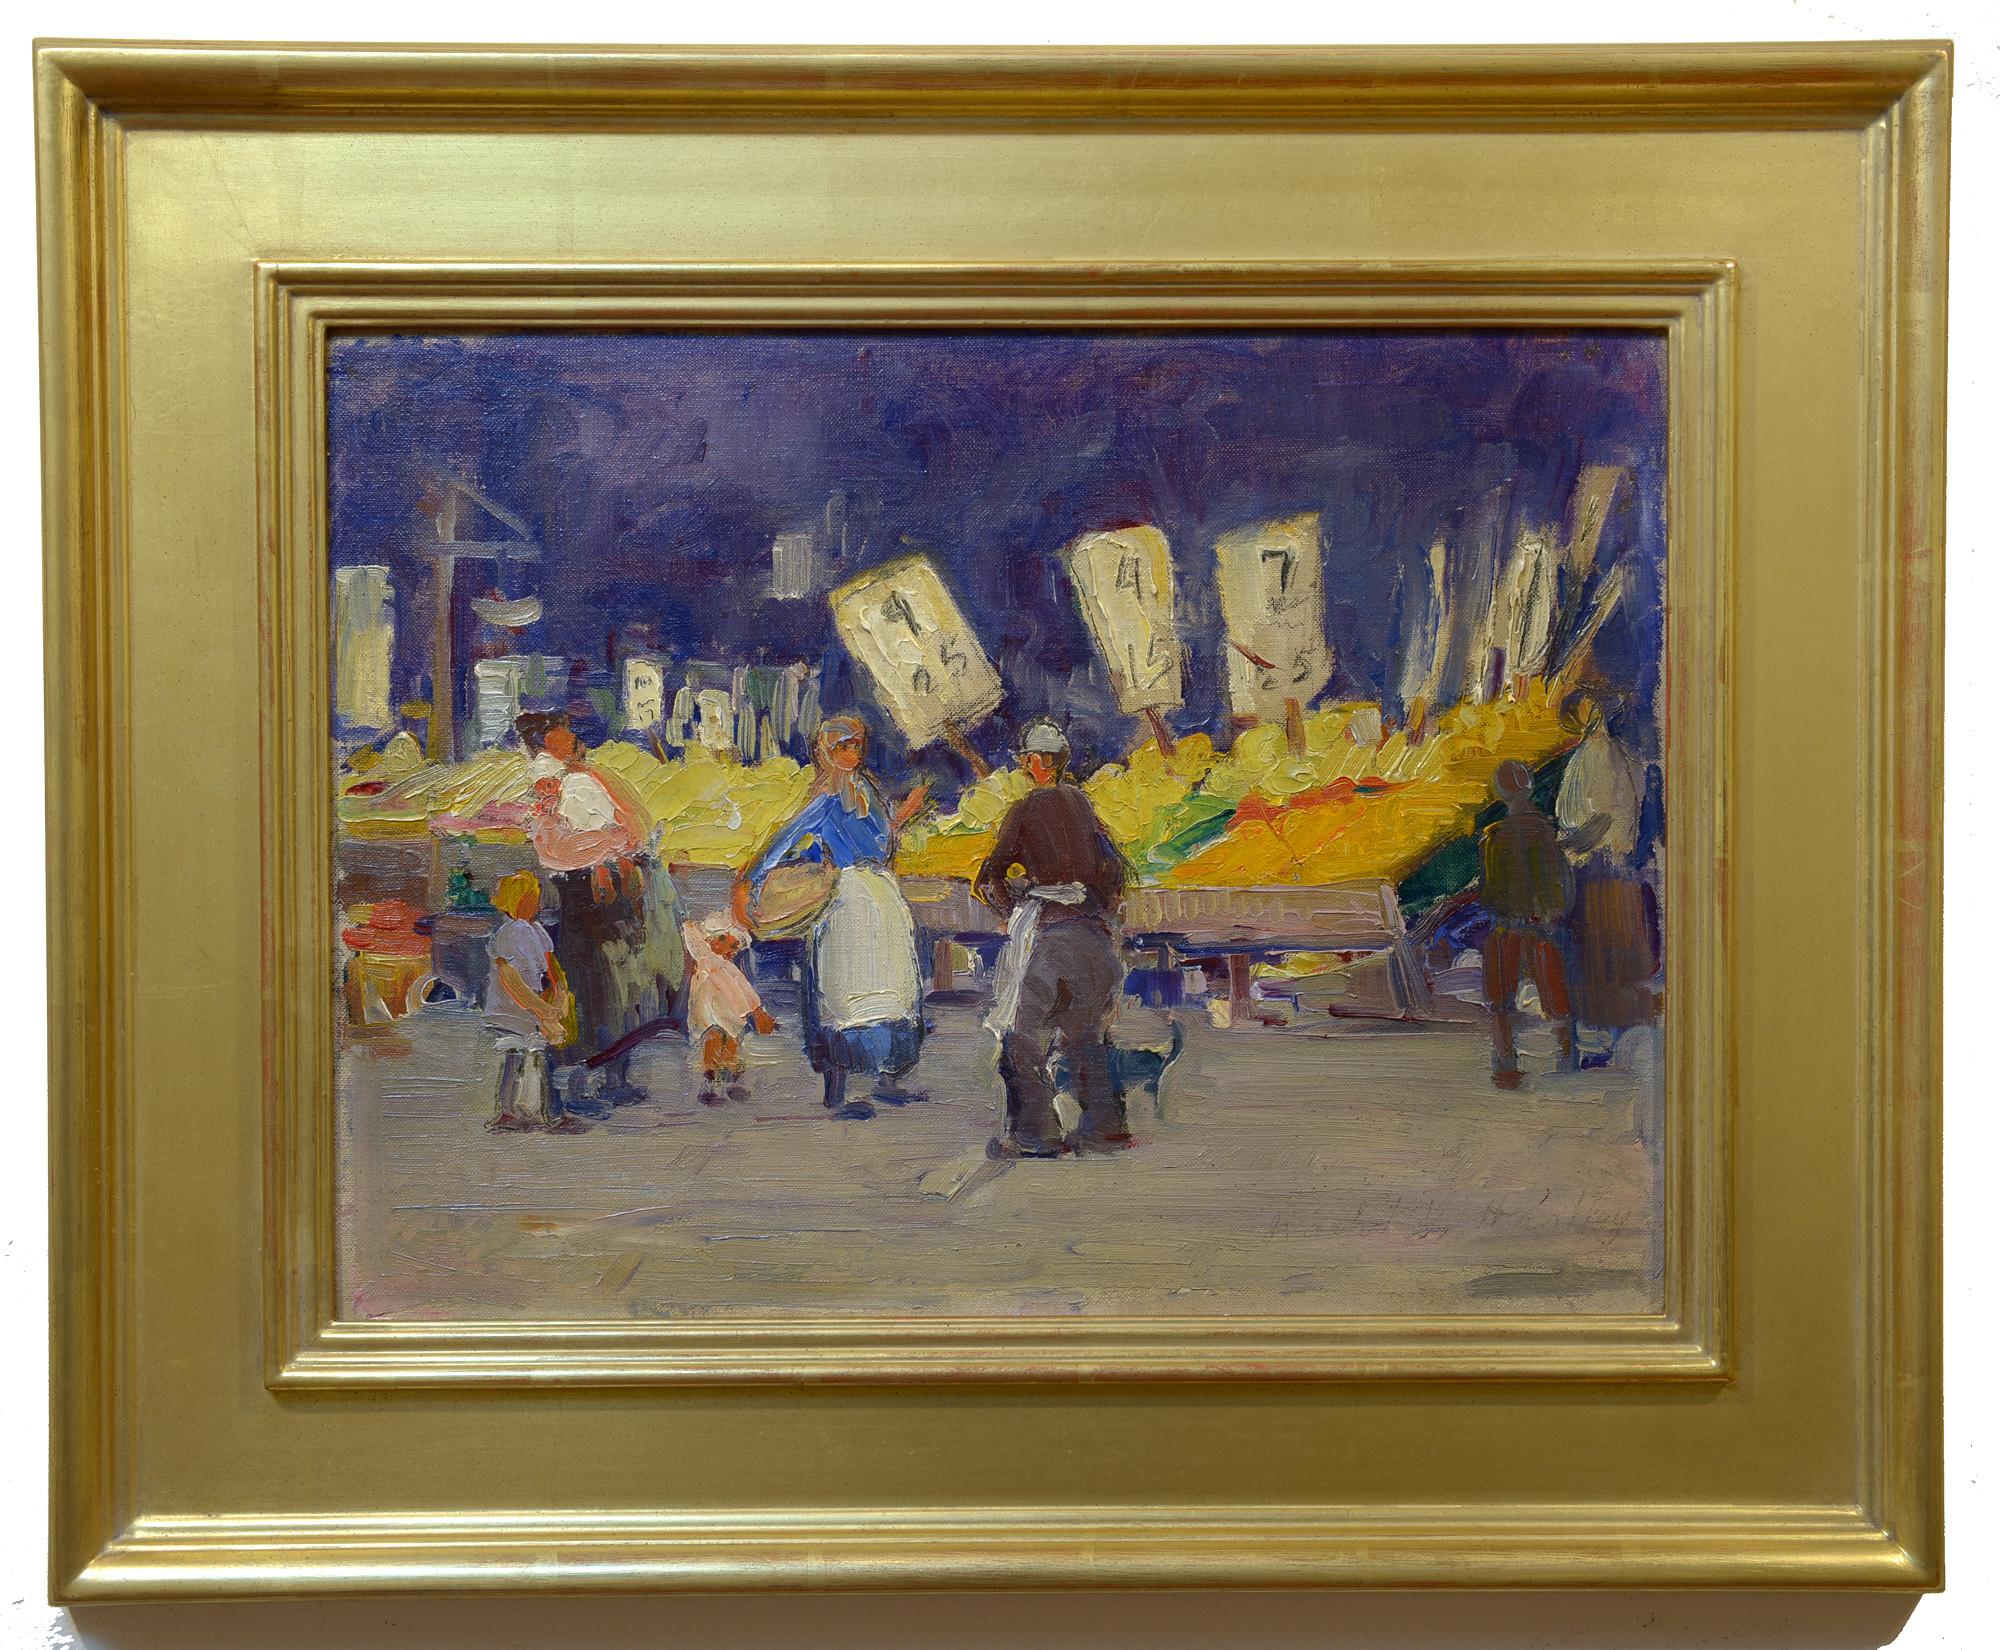 Market Day, Greenwich Village, New York City, Impressionist, Oil on Board - Painting by Rachel Hartley